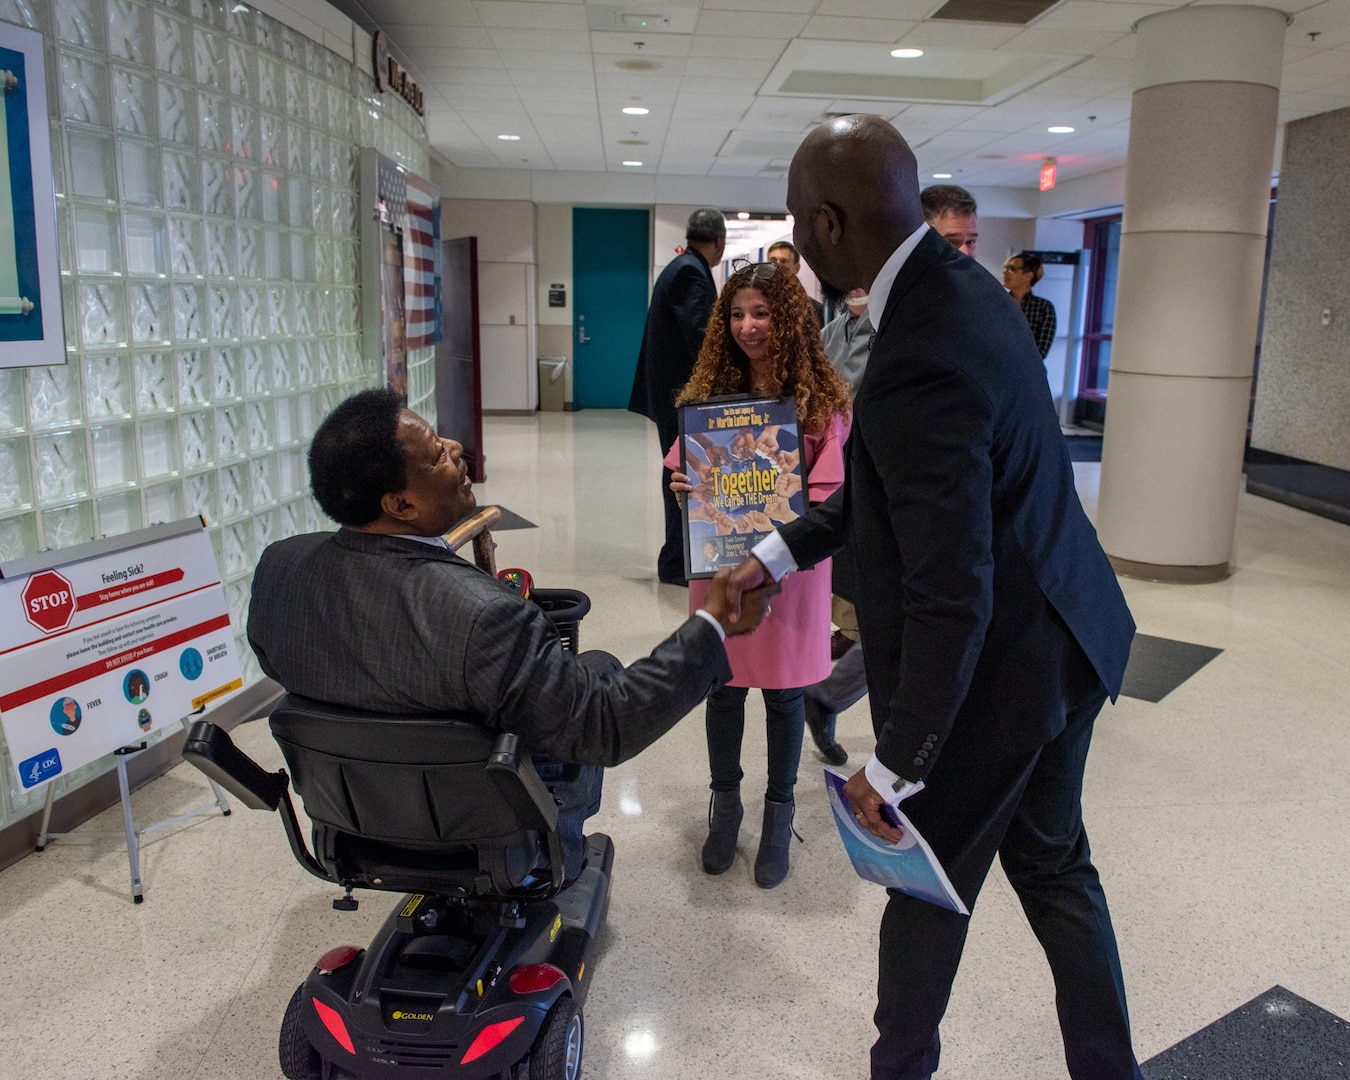 Two men shake hands. Both are dark skinned. One is in a scooter and the other is standing. A woman in a pink dress with red hair is in the background holding a framed poster.